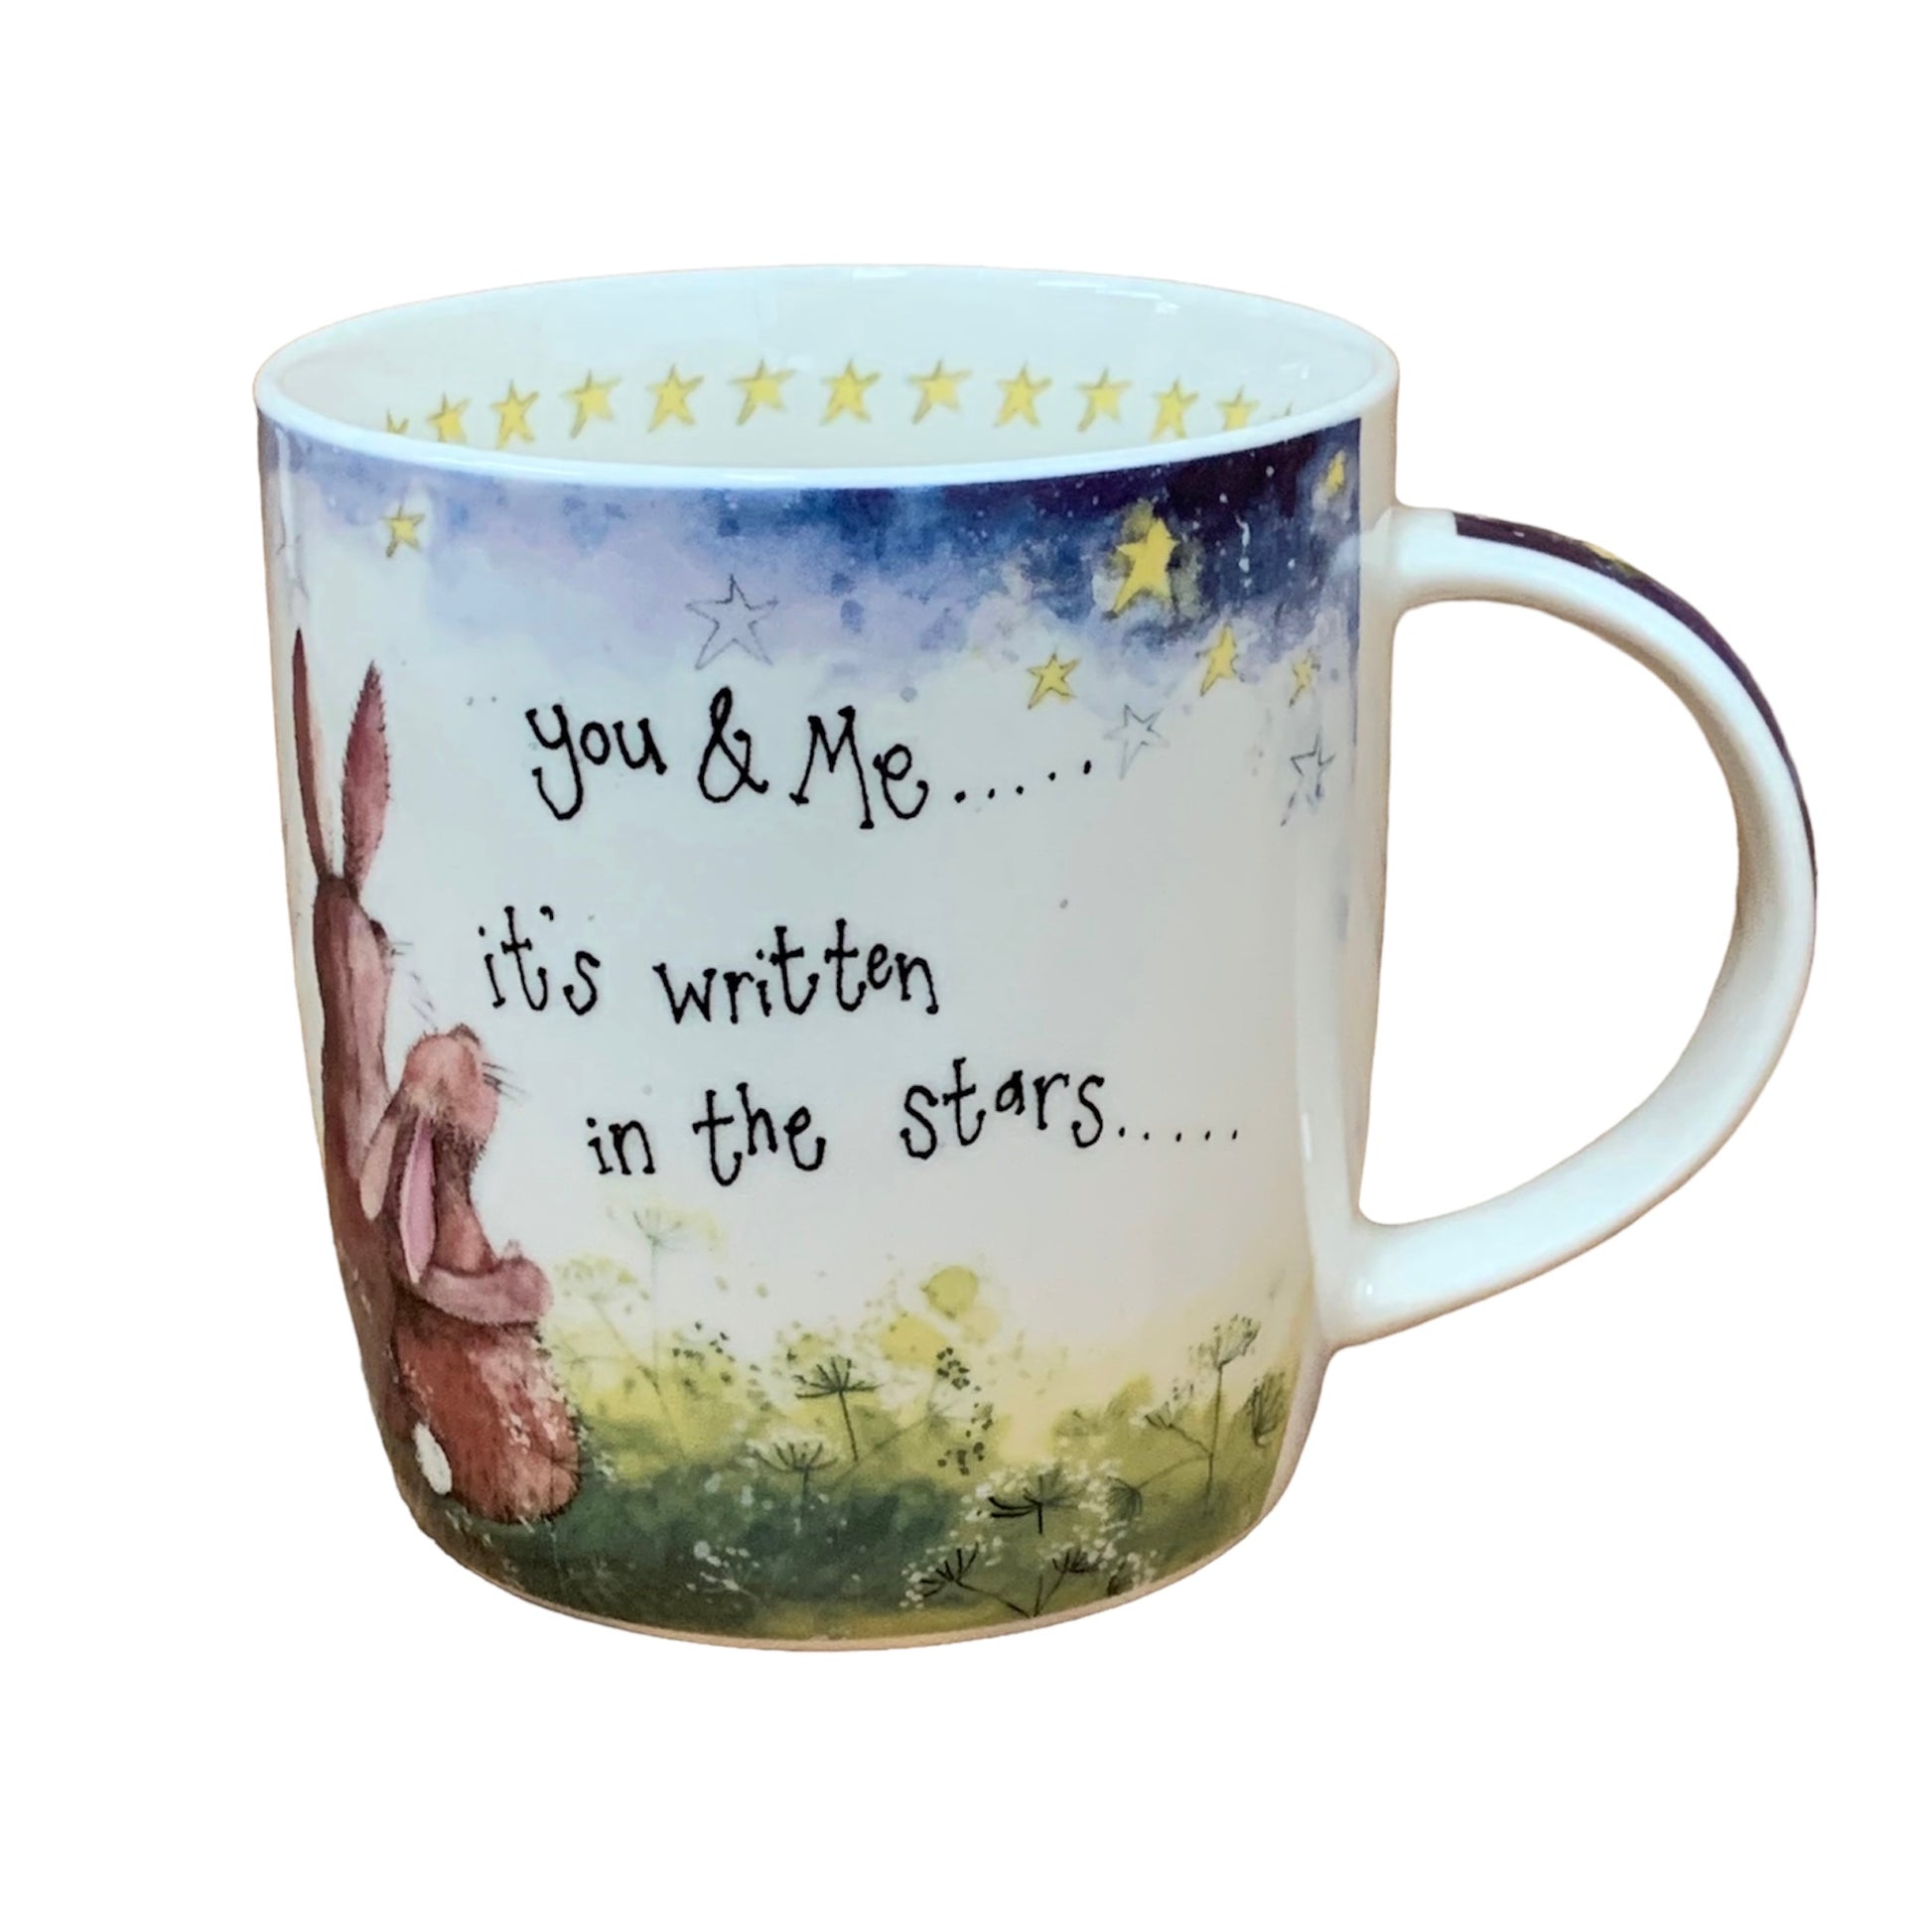 This Alex Clark mug is illustrated with 2 Bunnies looking up at the night sky and the words "You & me, it's written in the stars" on the side of the mug.  This mug also features yellow a stars illustration around the inside rim & illustrations down the handle.  